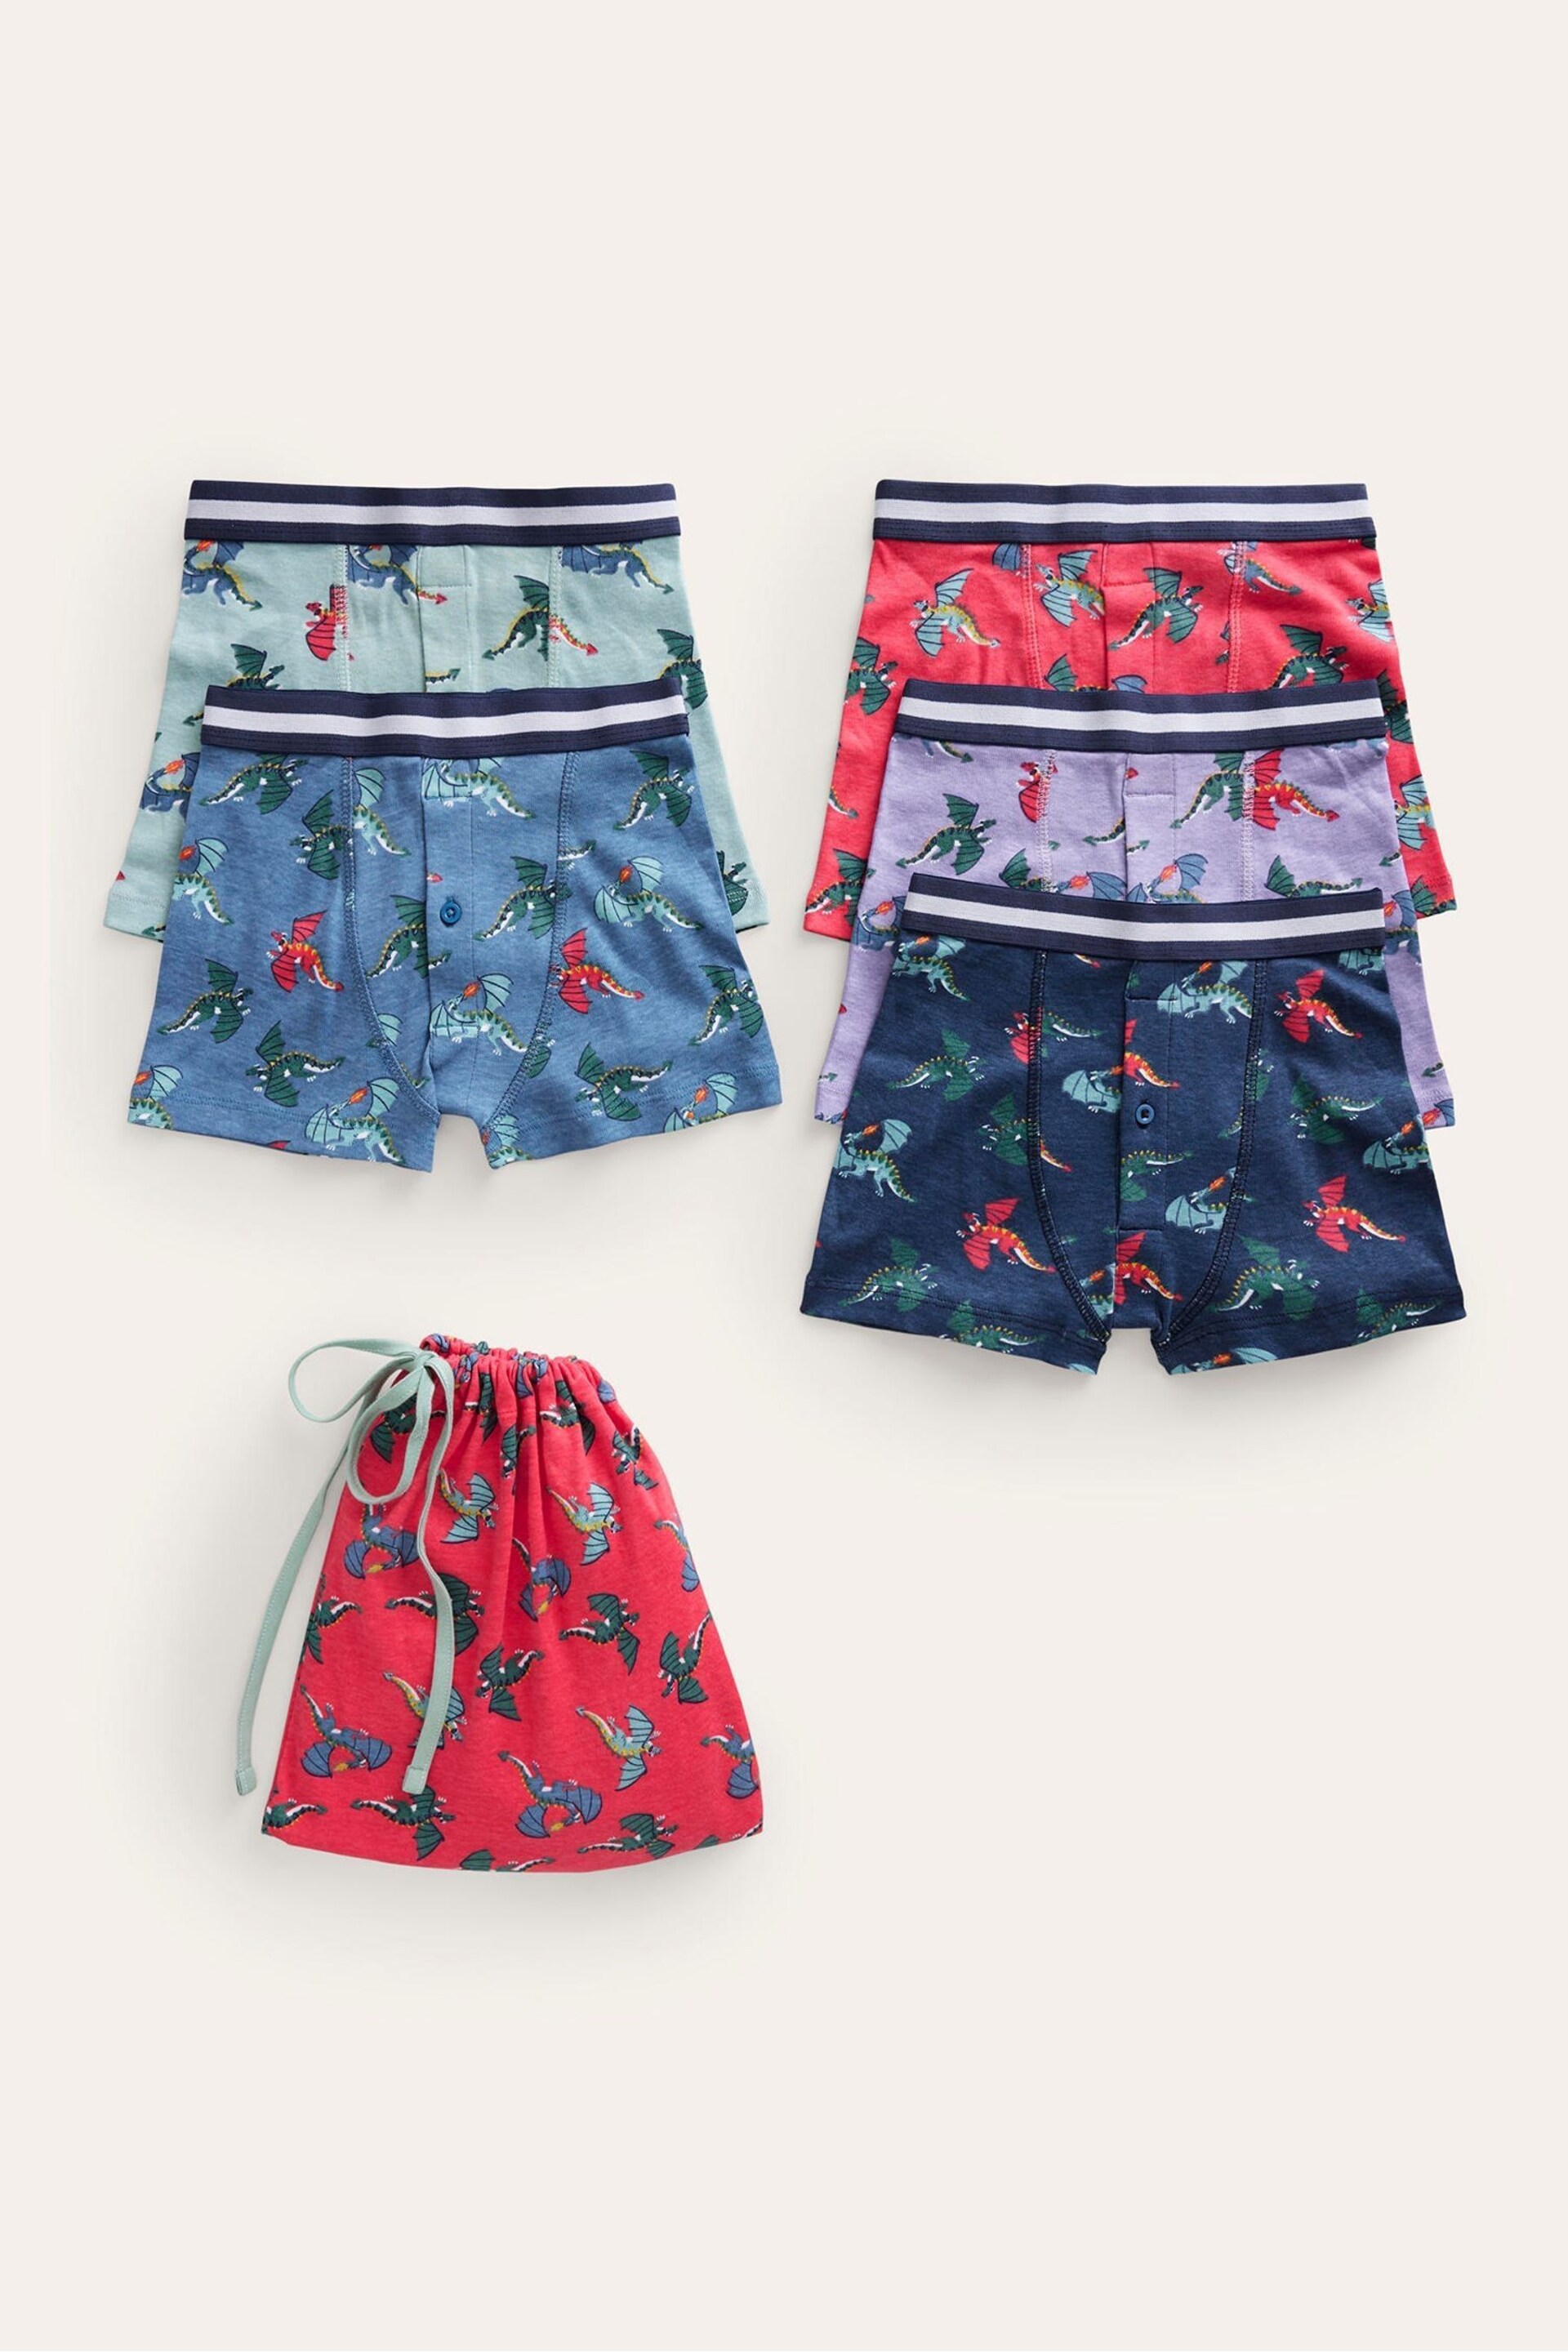 Boden Blue Boxers 5 Pack - Image 1 of 3